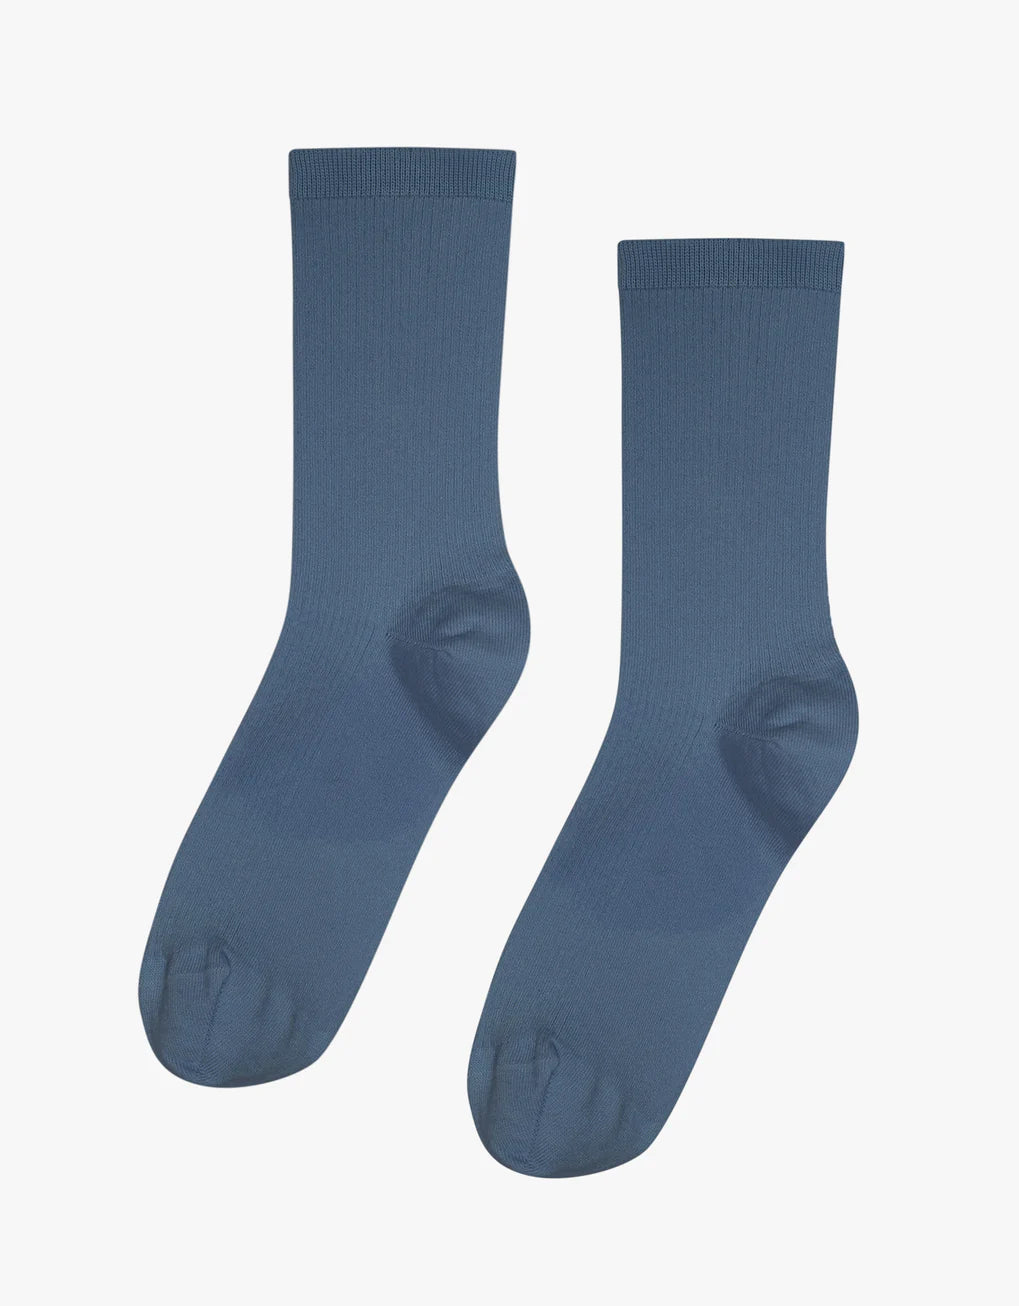 A pair of Classic Organic Sock by Colorful Standard on a white background.